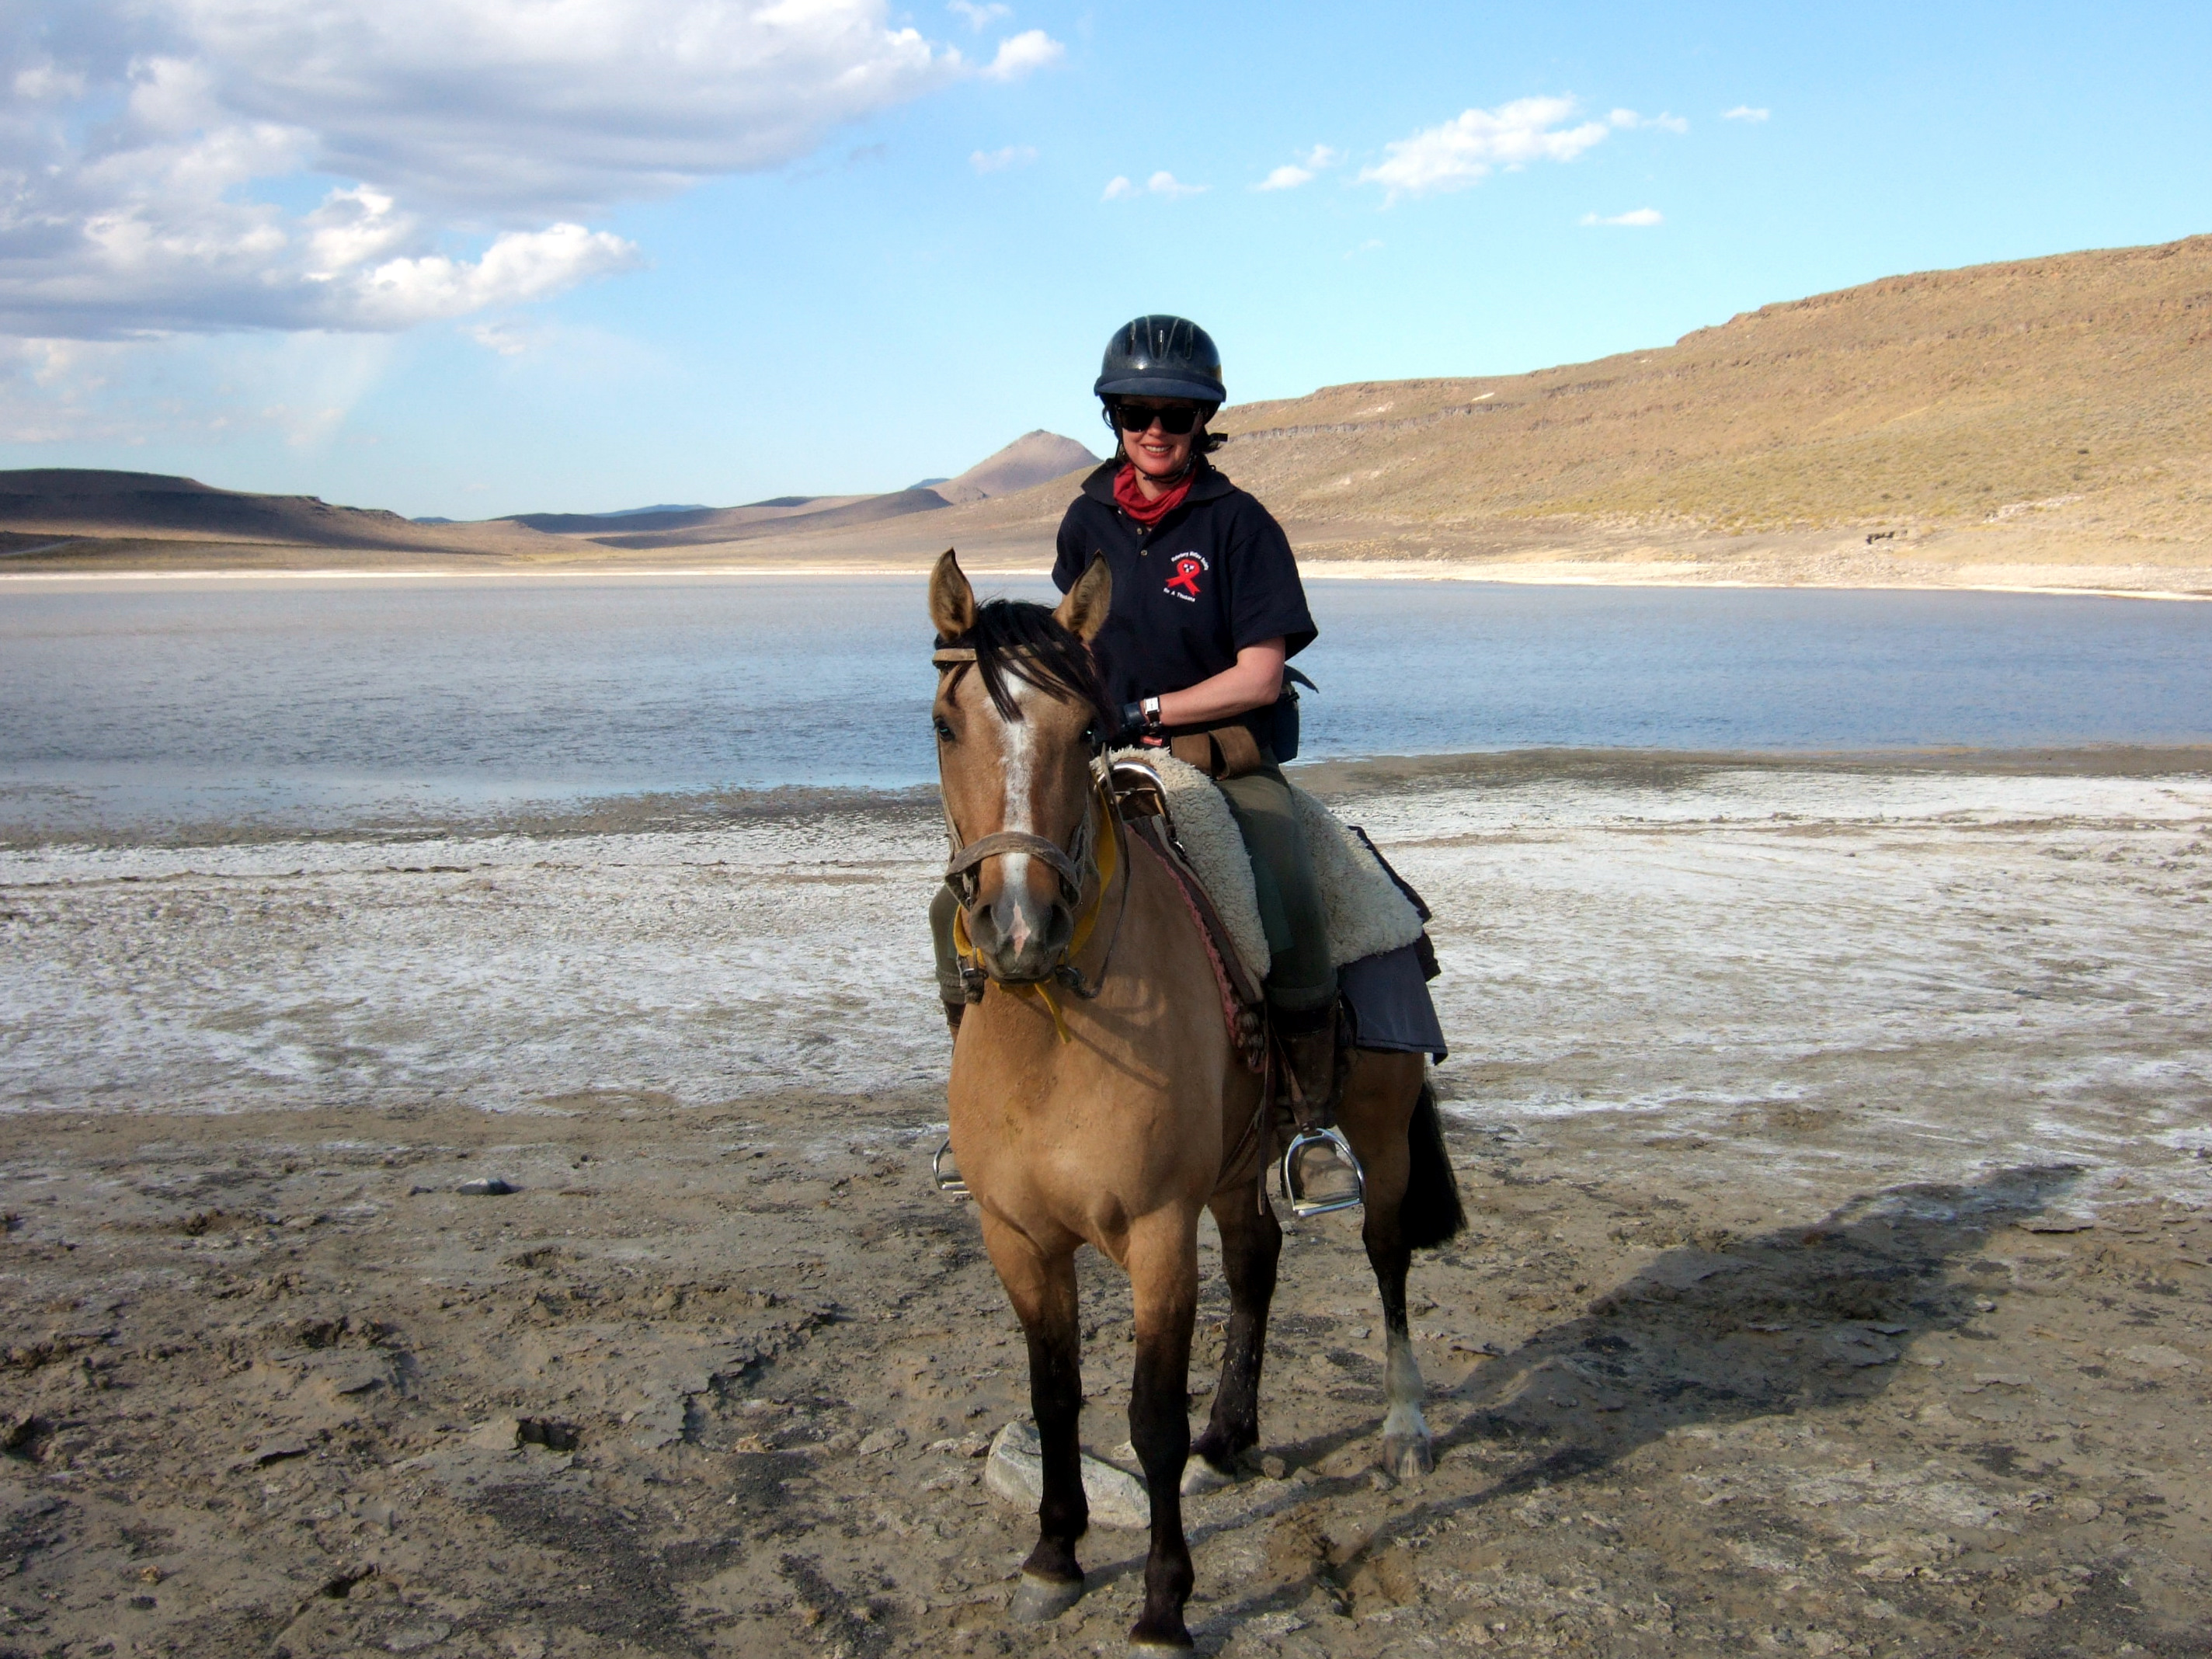 Sophie Neville in Patagonia riding across South America to riase funds for her HIV/AIDS charity http://www.waterbergwelfaresociety.org.za/